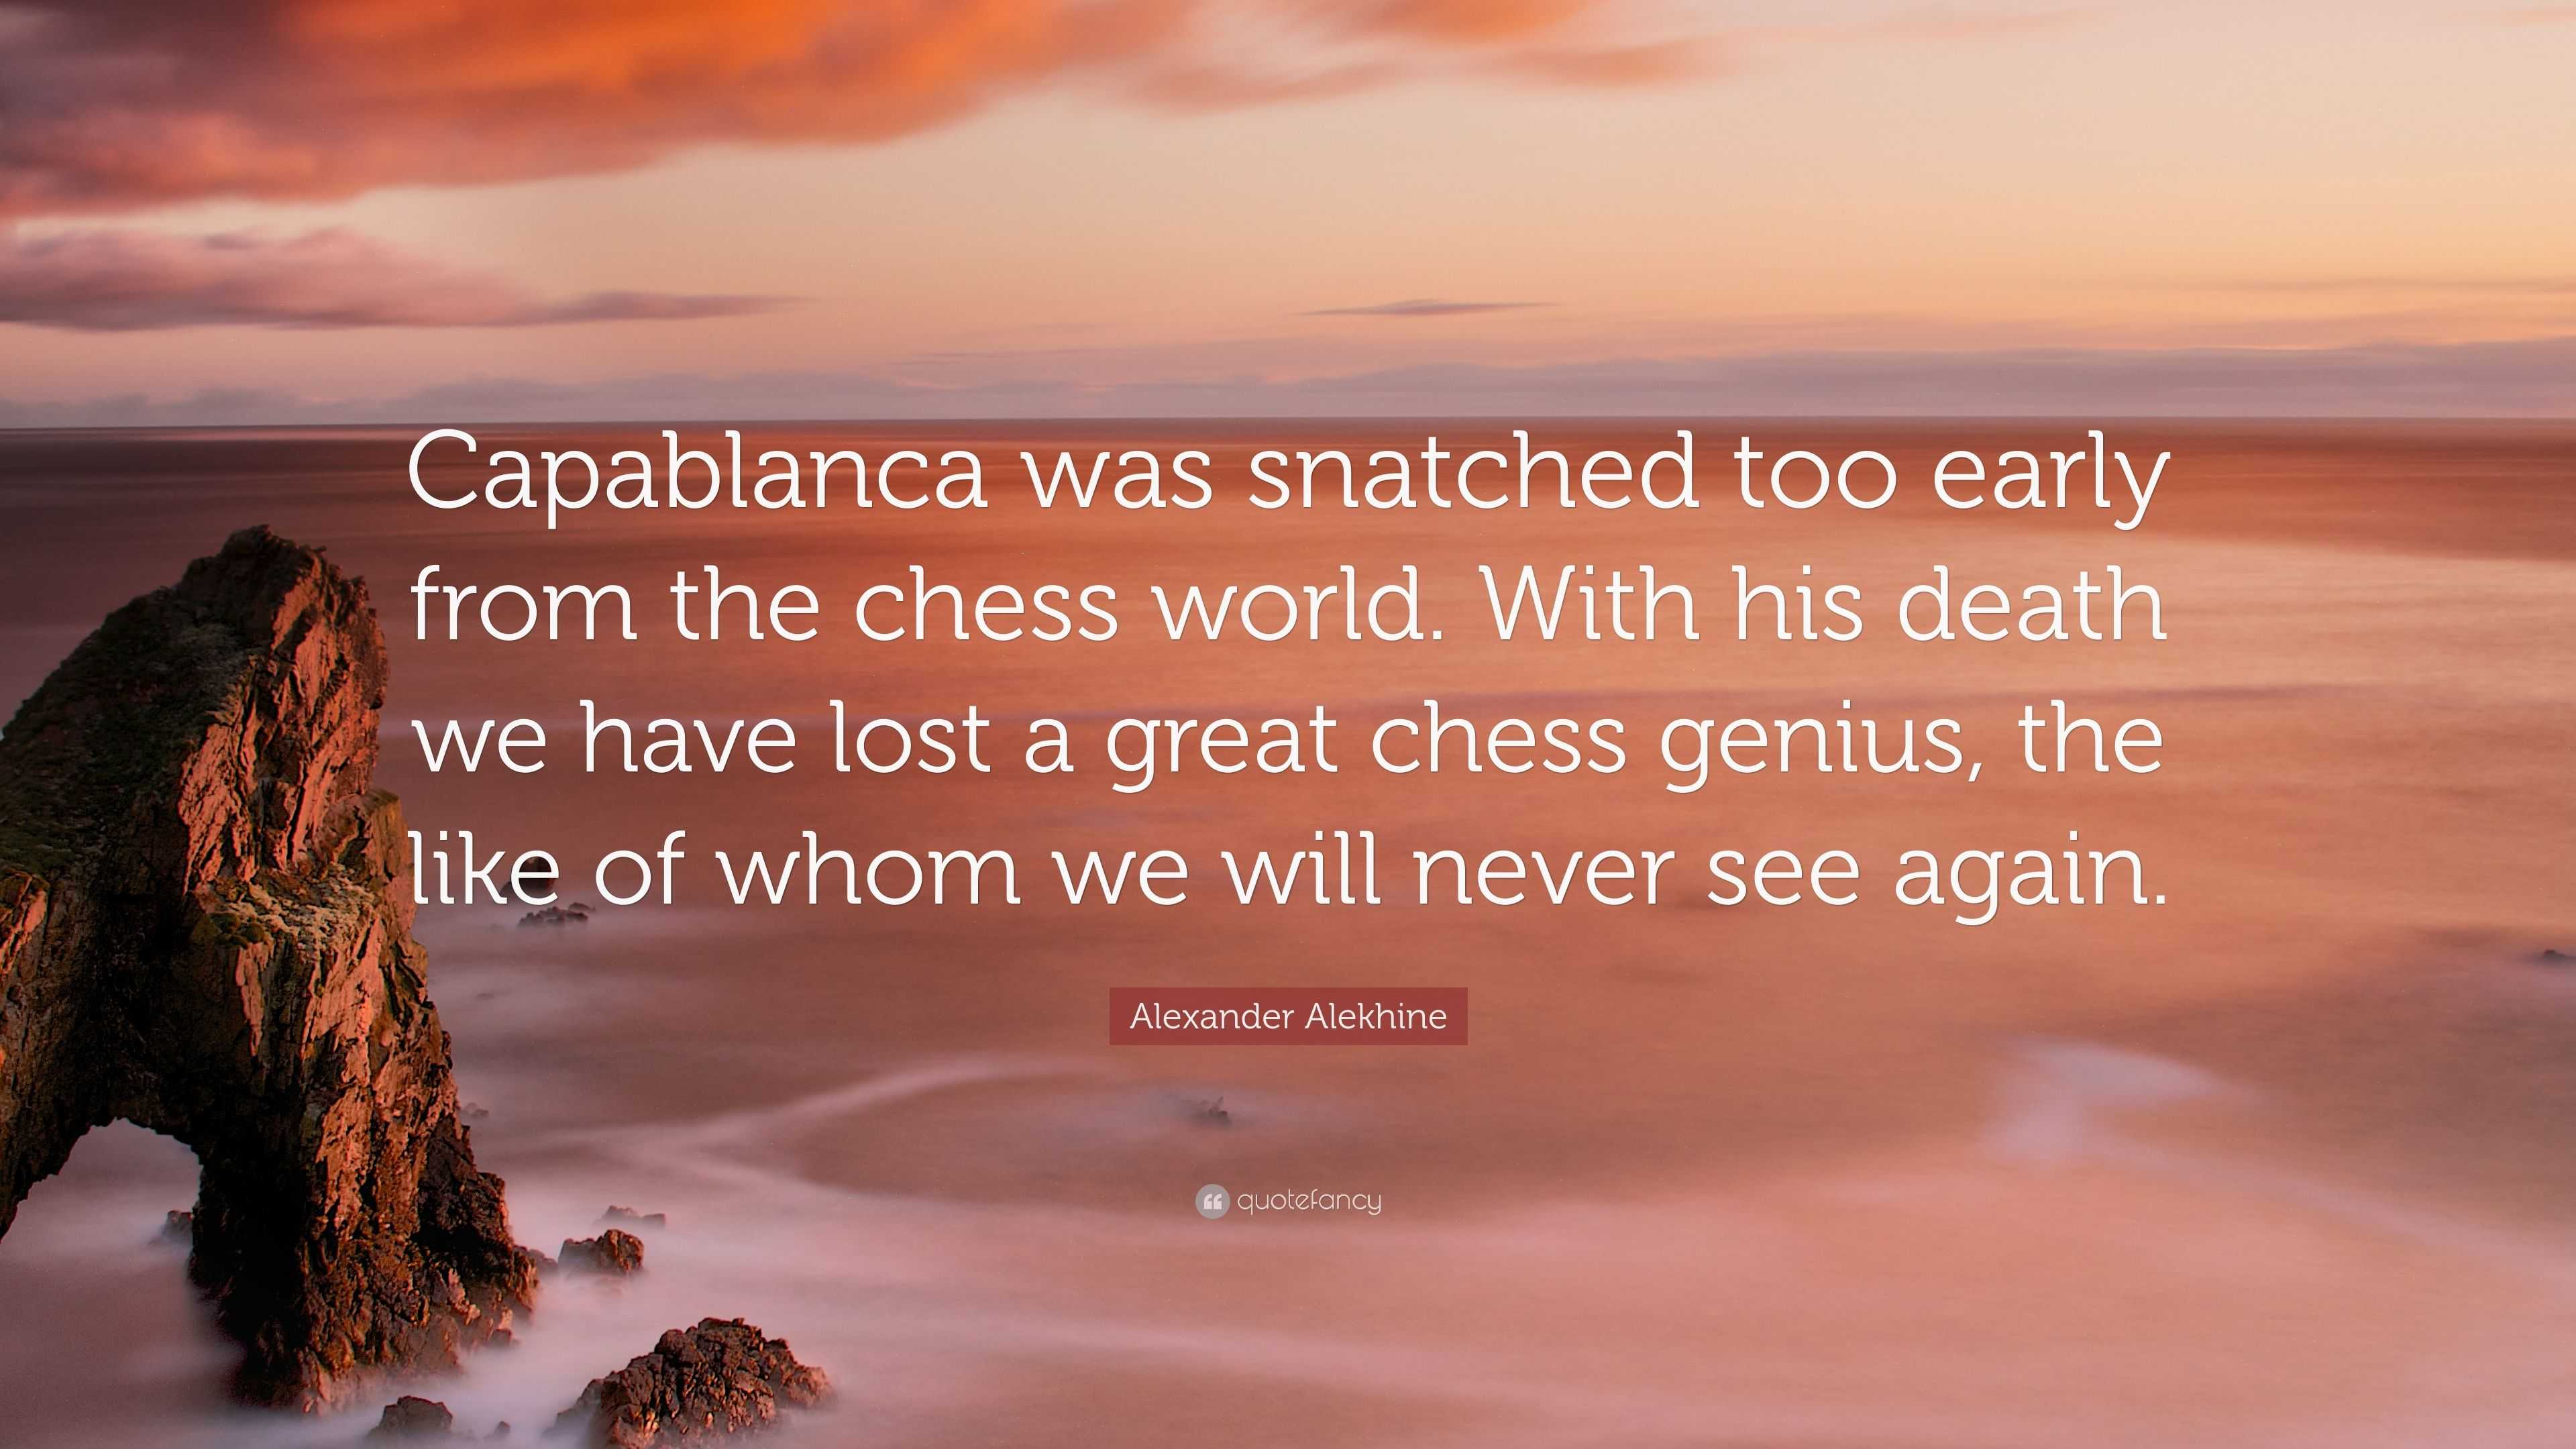 Alexander Alekhine quote: For my victory over Capablanca I am